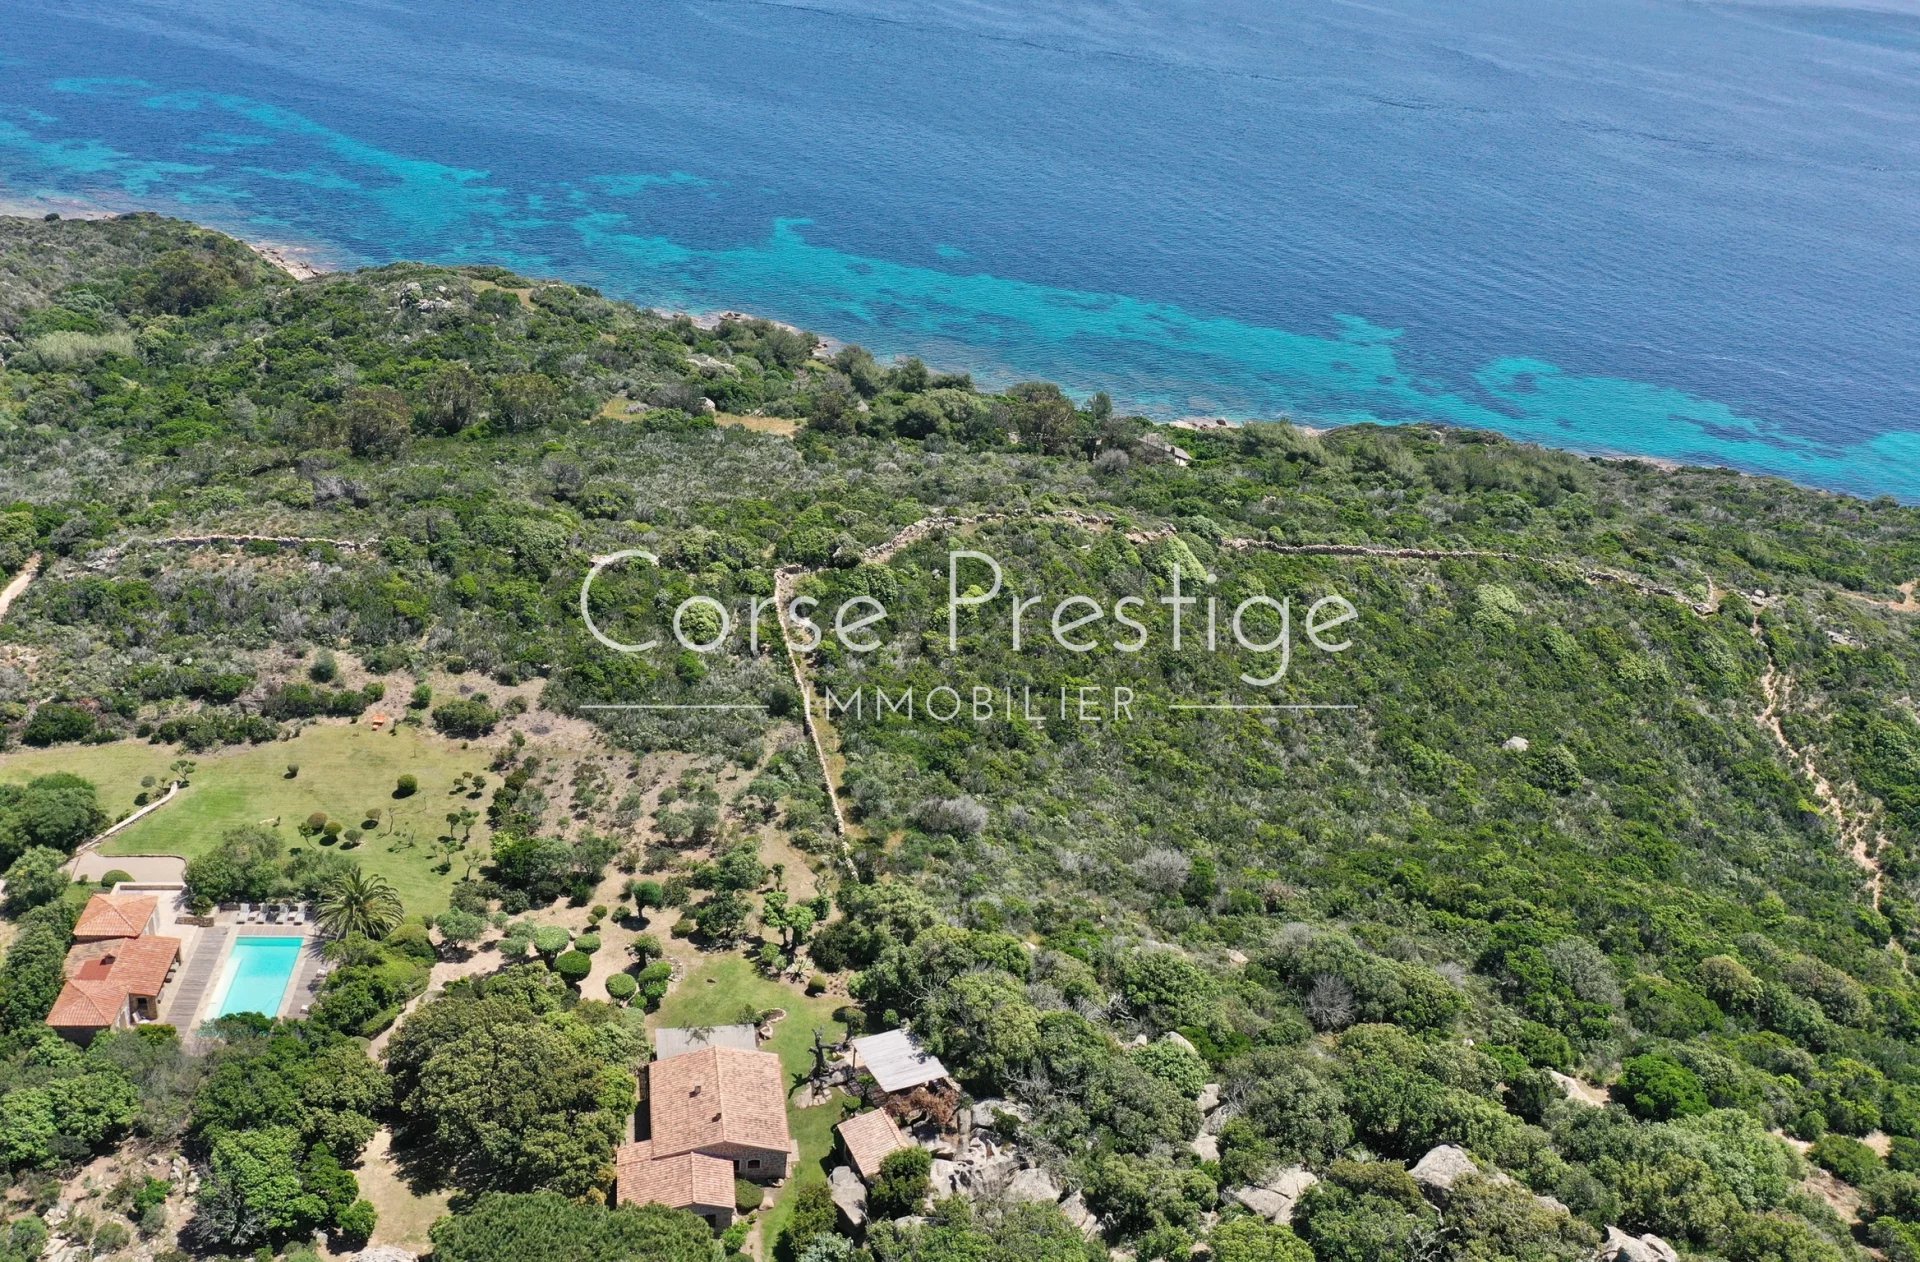 sheepfold to rent in bonifacio - away from prying eyes - south corsica image1